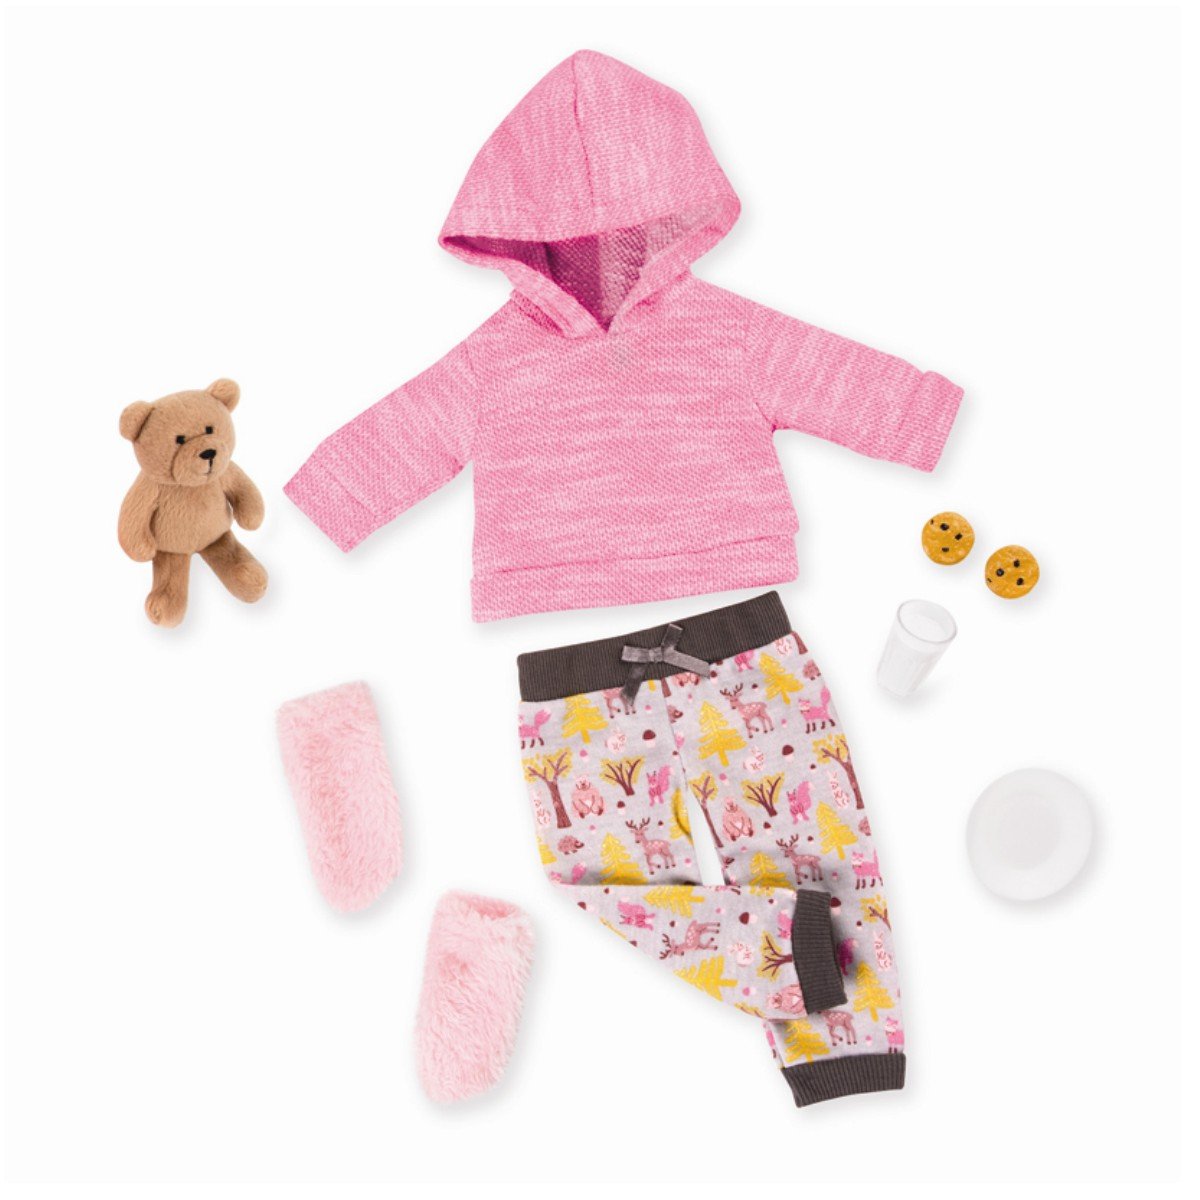 clothes for generation dolls